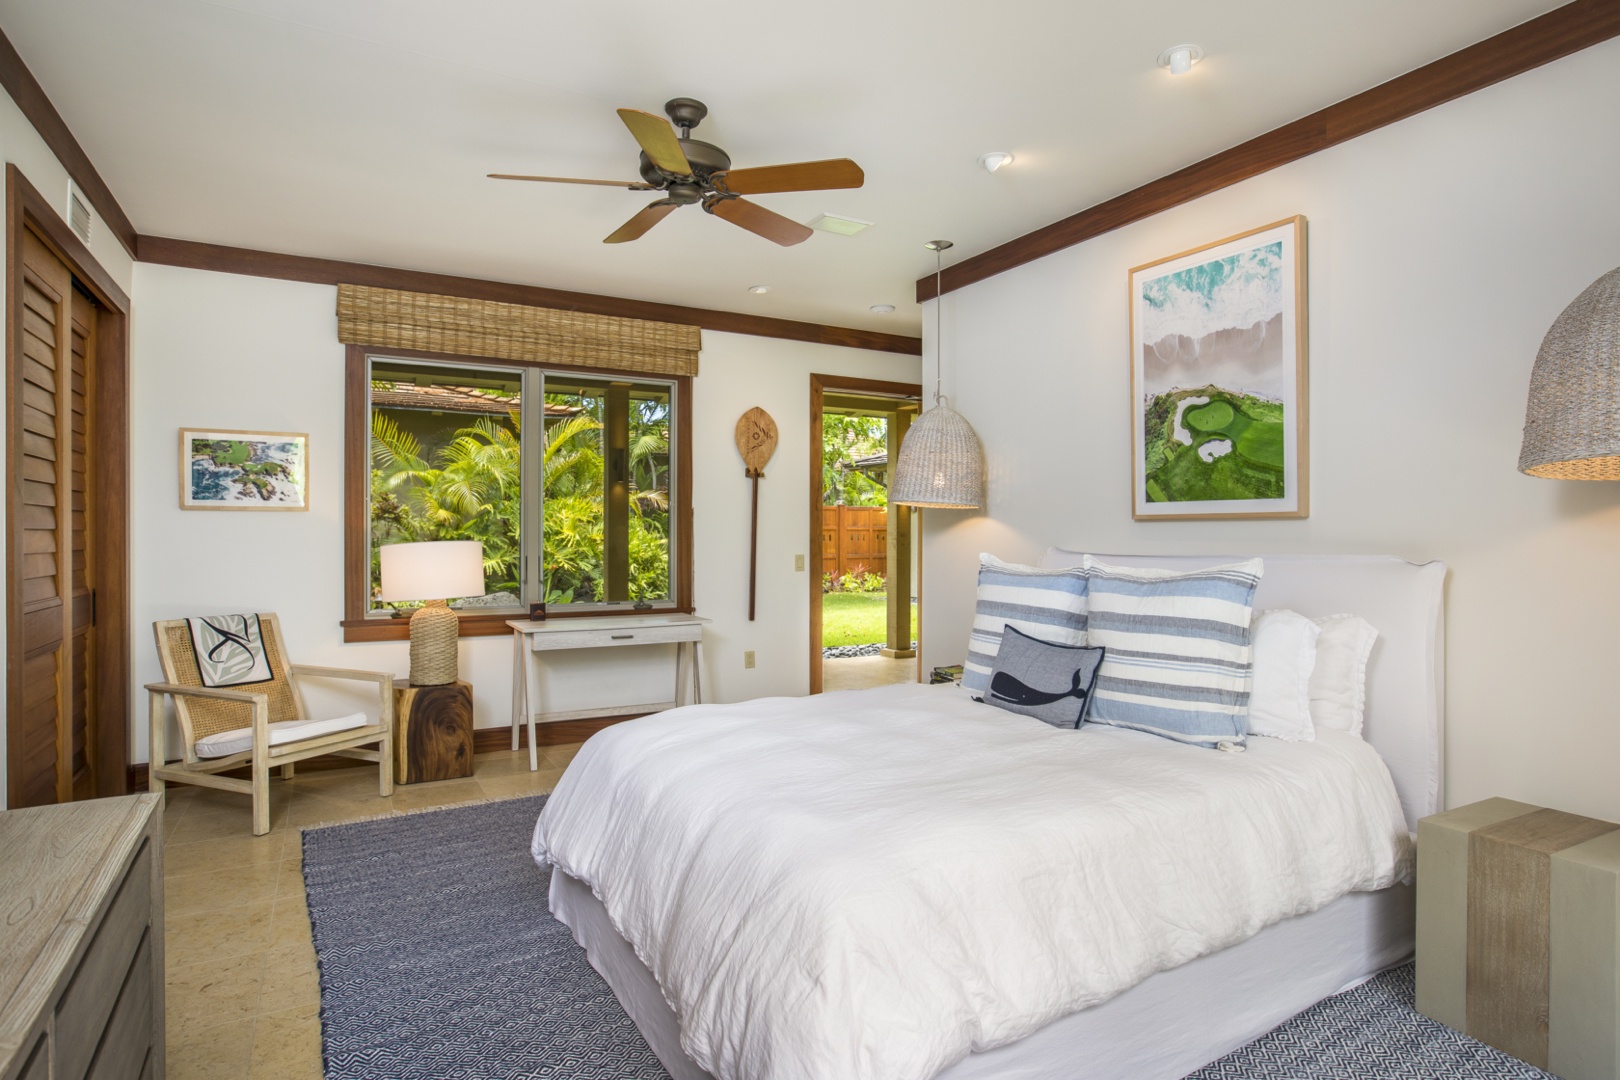 Kailua Kona Vacation Rentals, 4BD Kahikole Street (218) Estate Home at Four Seasons Resort at Hualalai - The third bedroom includes a queen bed & en suite bathroom